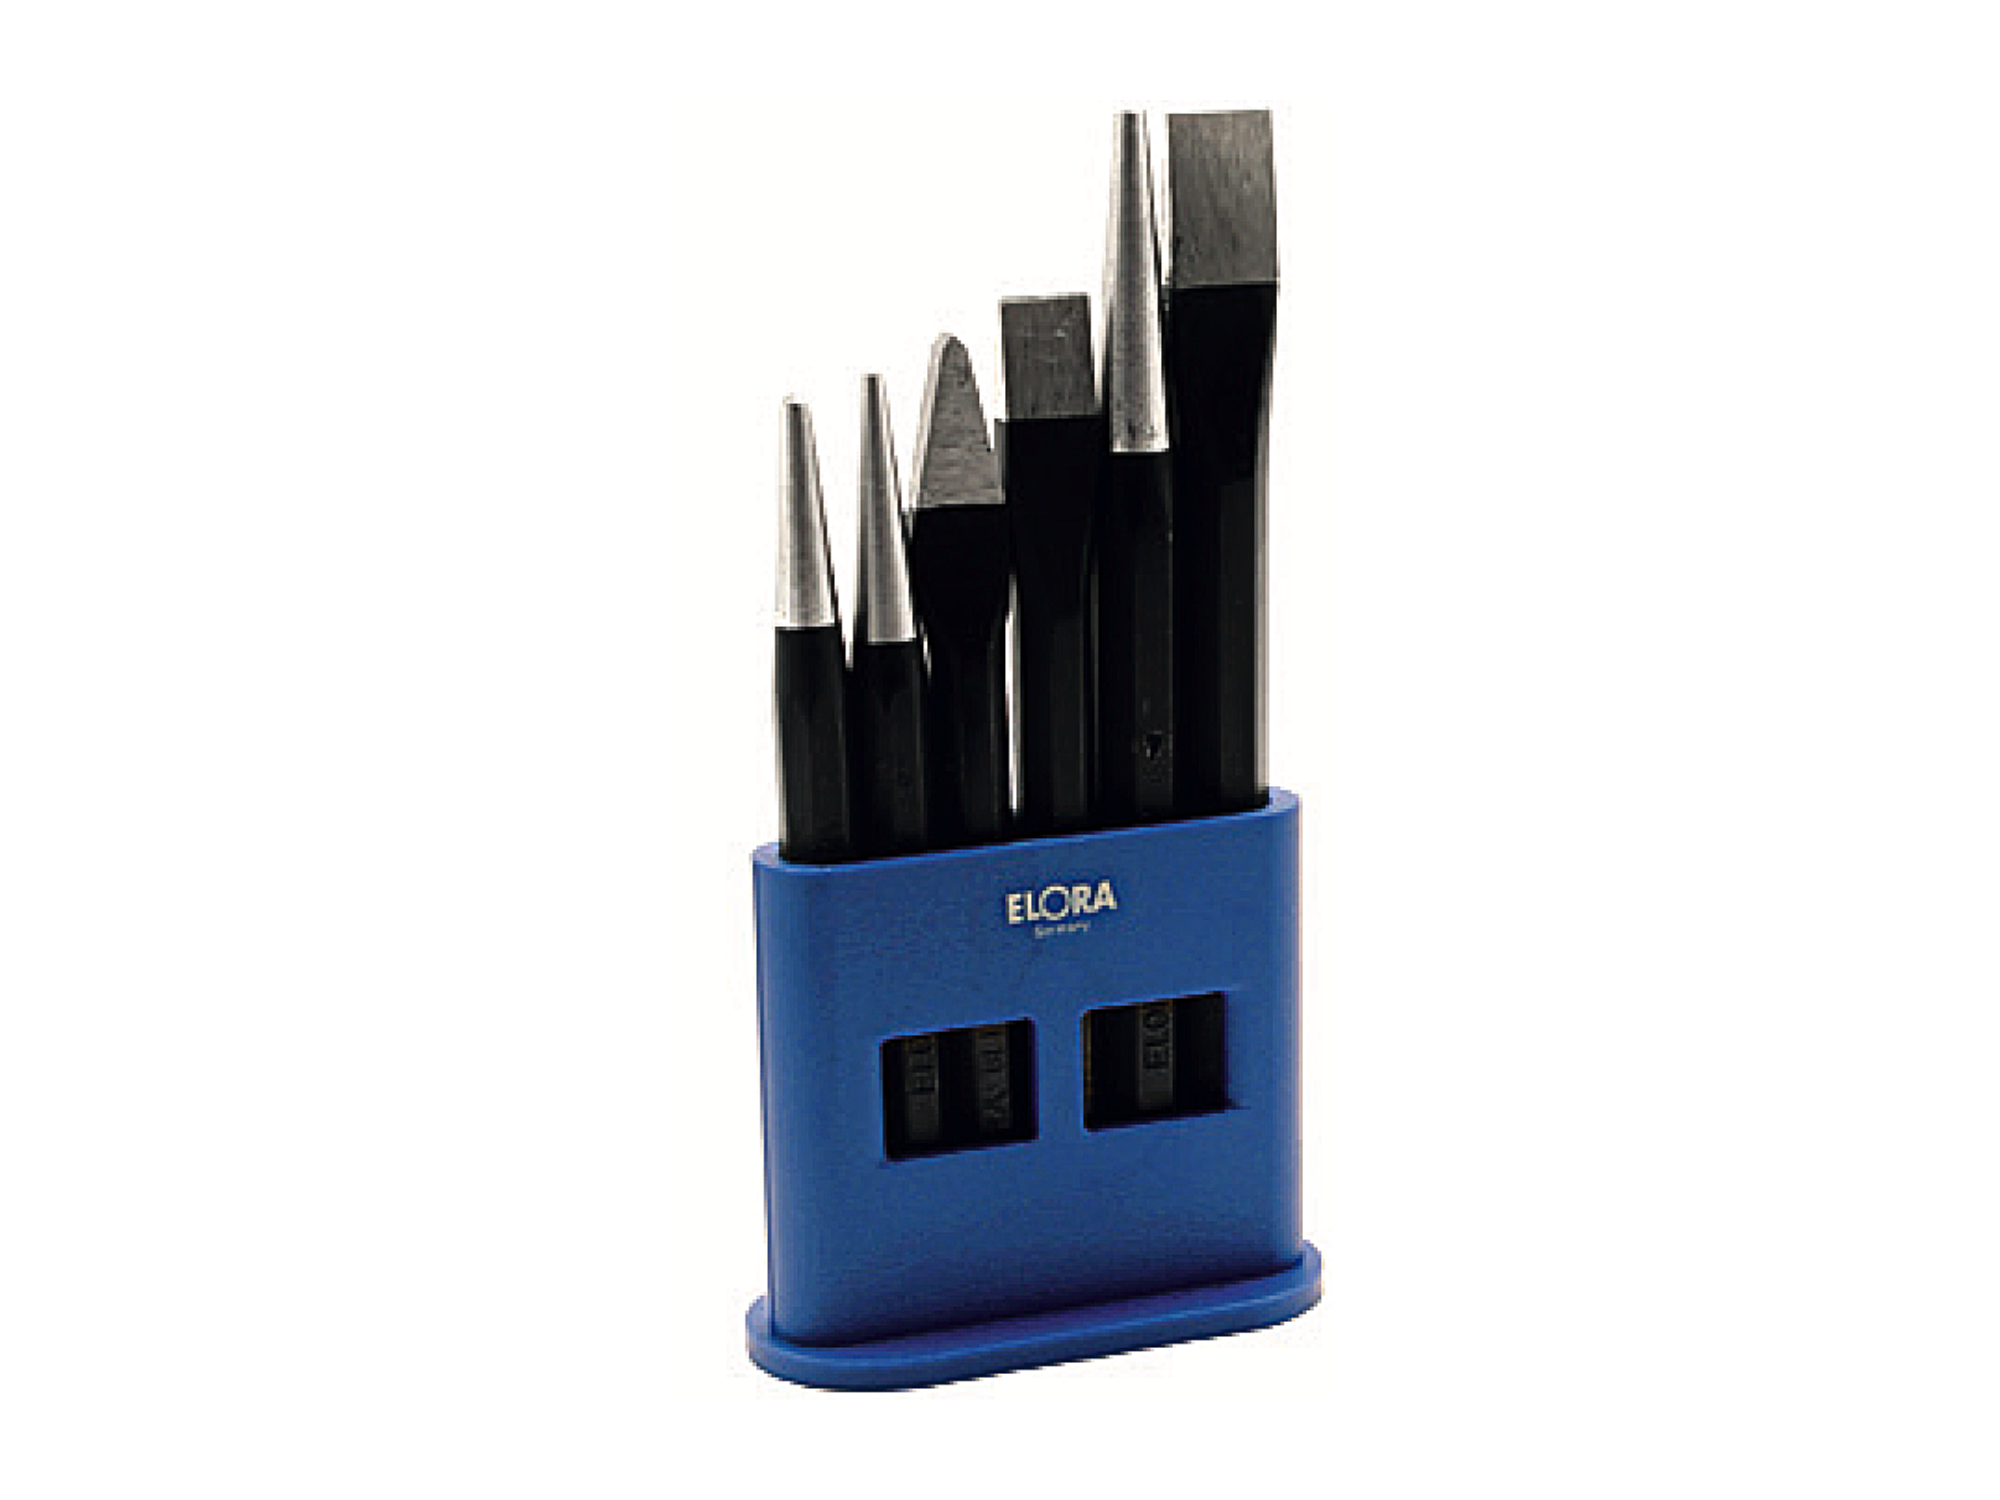 ELORA 266K Chisel And Punch Set In Metal Box (ELORA Tools) - Premium Chisel and Punch Set from ELORA - Shop now at Yew Aik.